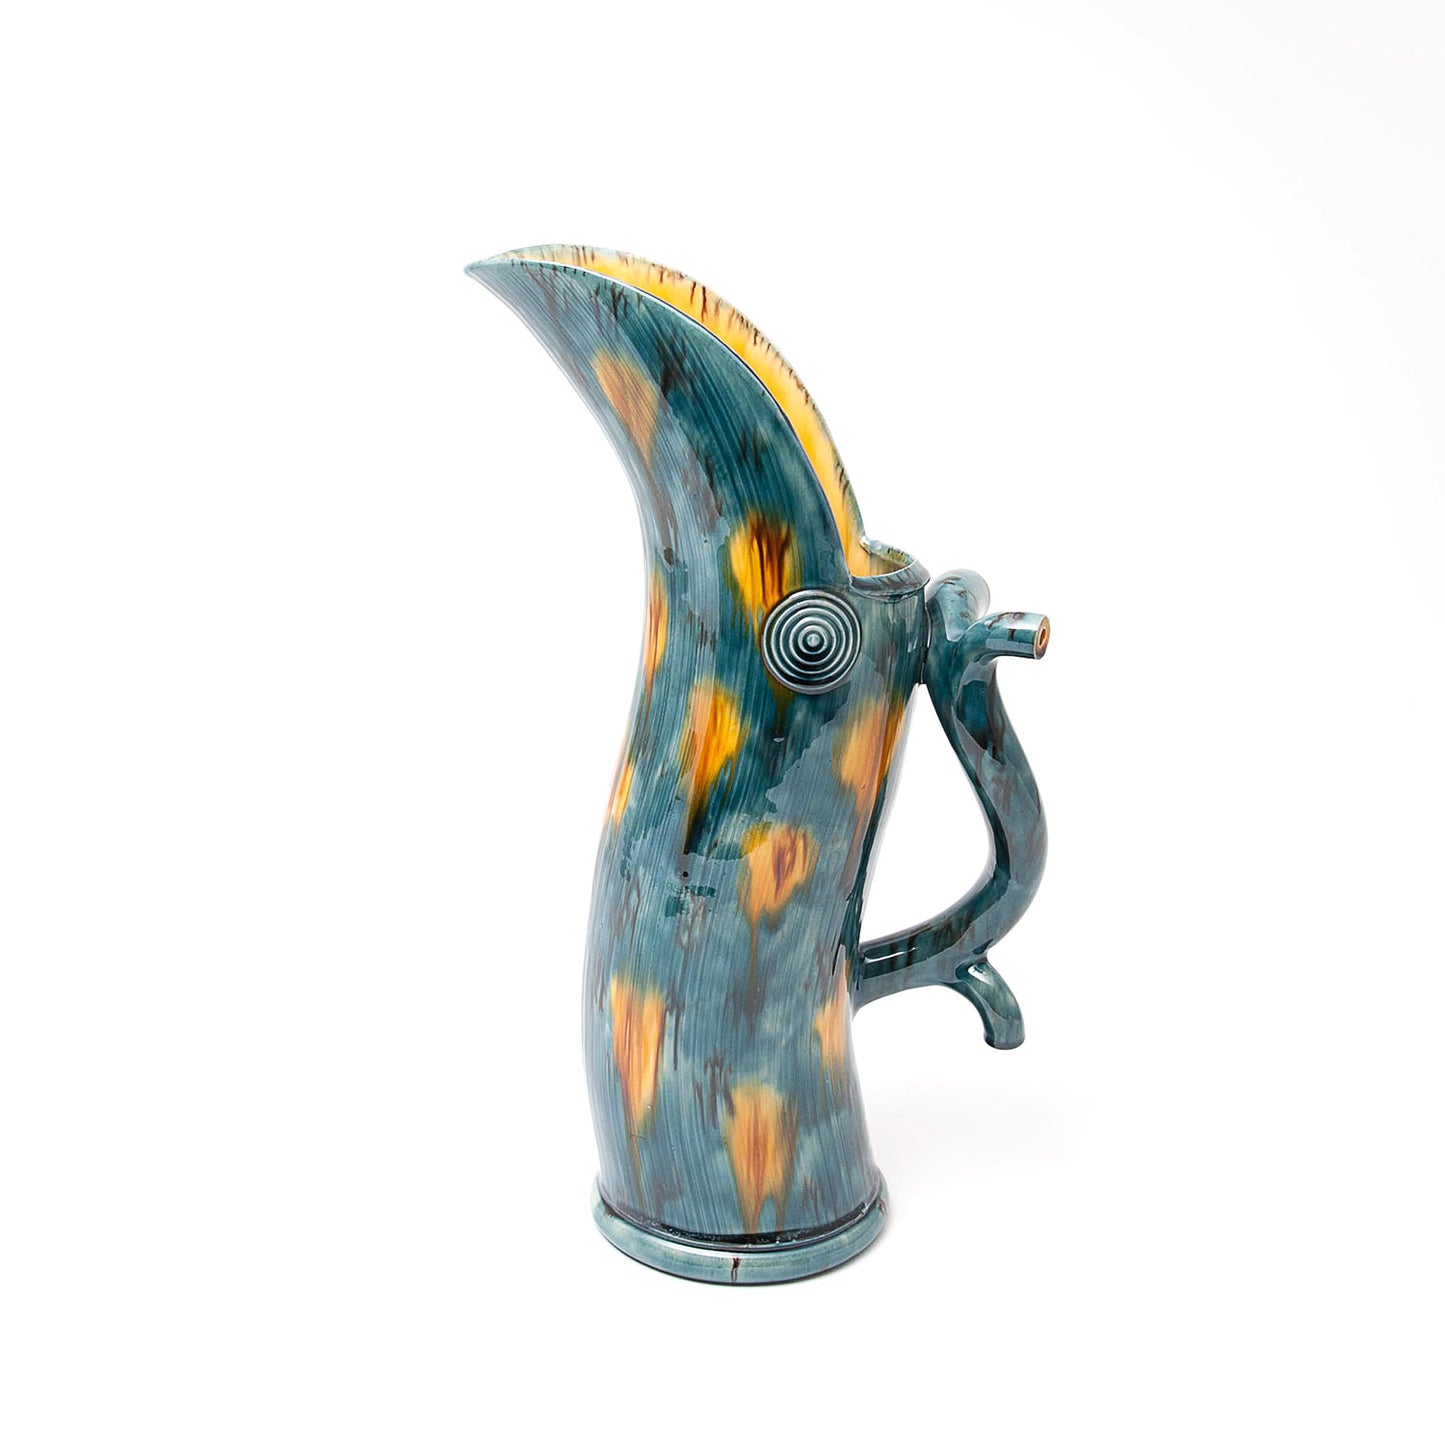 Large Extruded Jug with Branched Handle